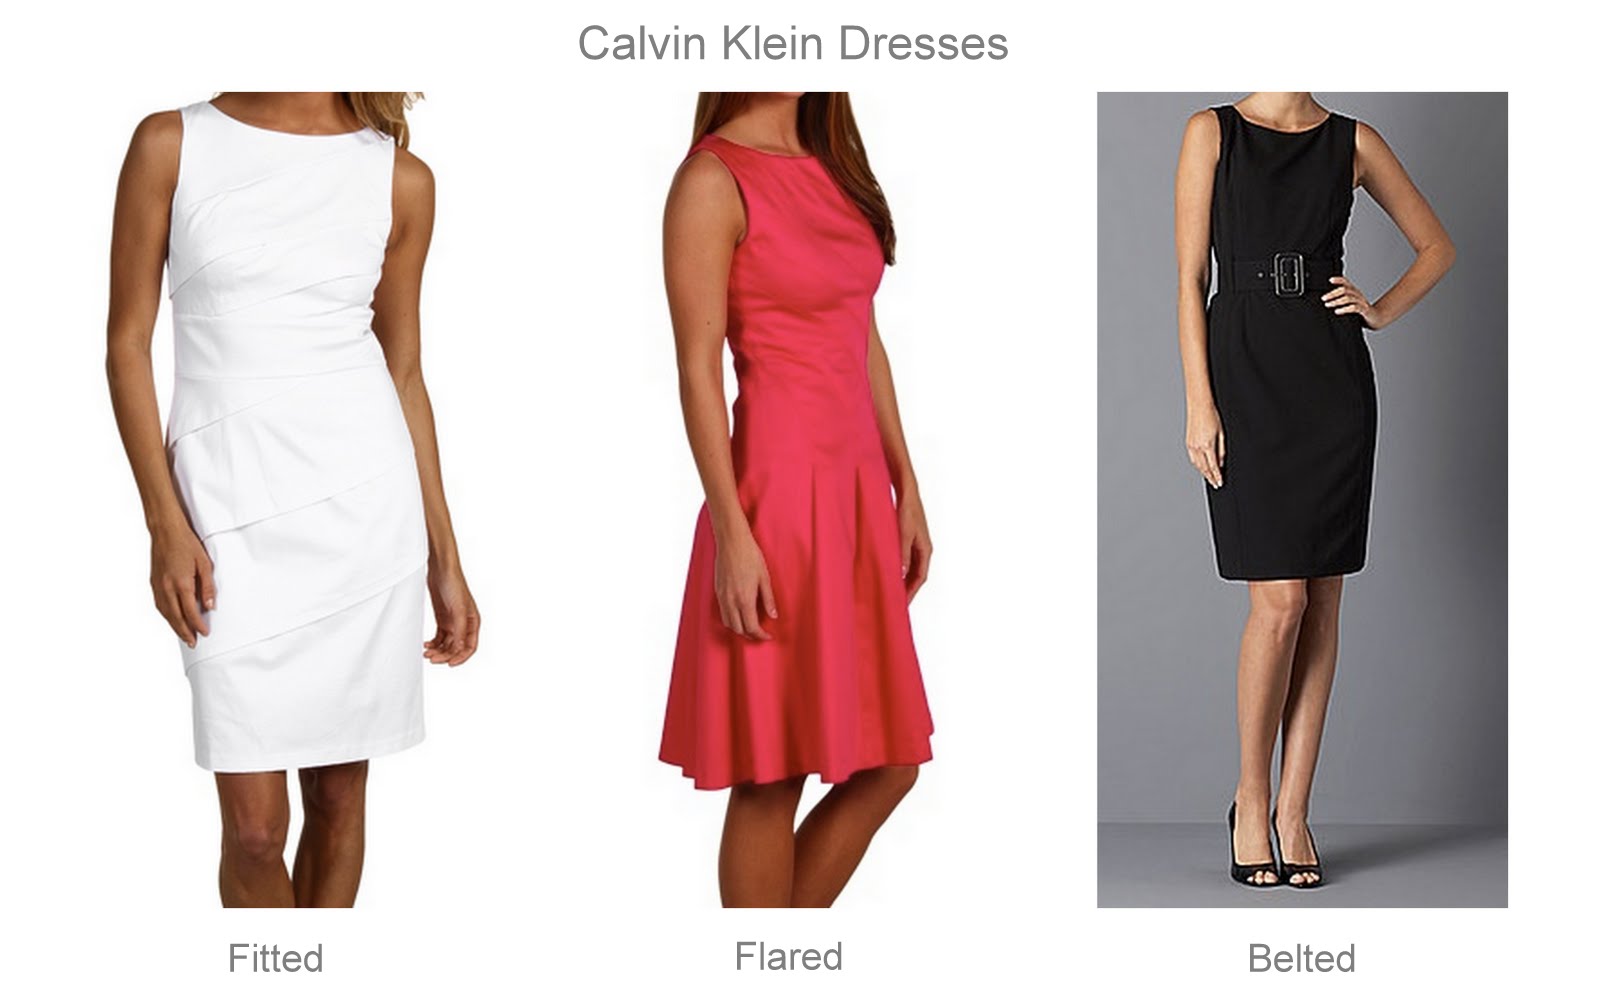 lord and taylor dresses calvin klein